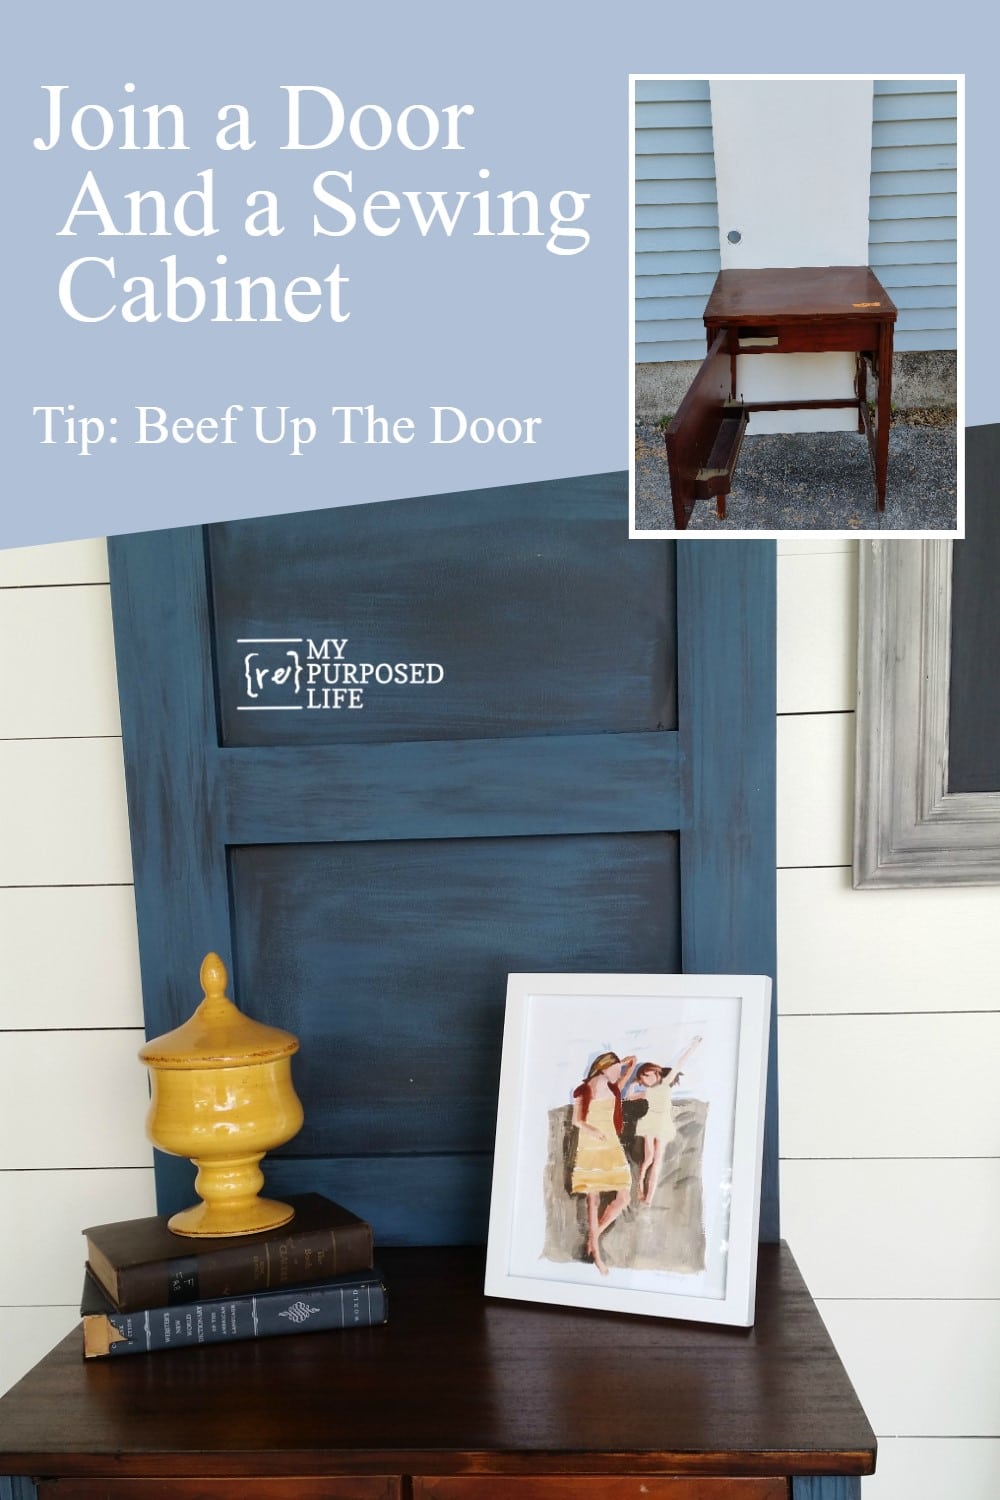 How to make a DIY hall tree table out of an old door and a sewing cabinet. I used a hollow door and trimmed it out with some boards to add more character. #MyRepurposedLife #repurposed #furniture #sewingcabinet #halltree #diy via @repurposedlife